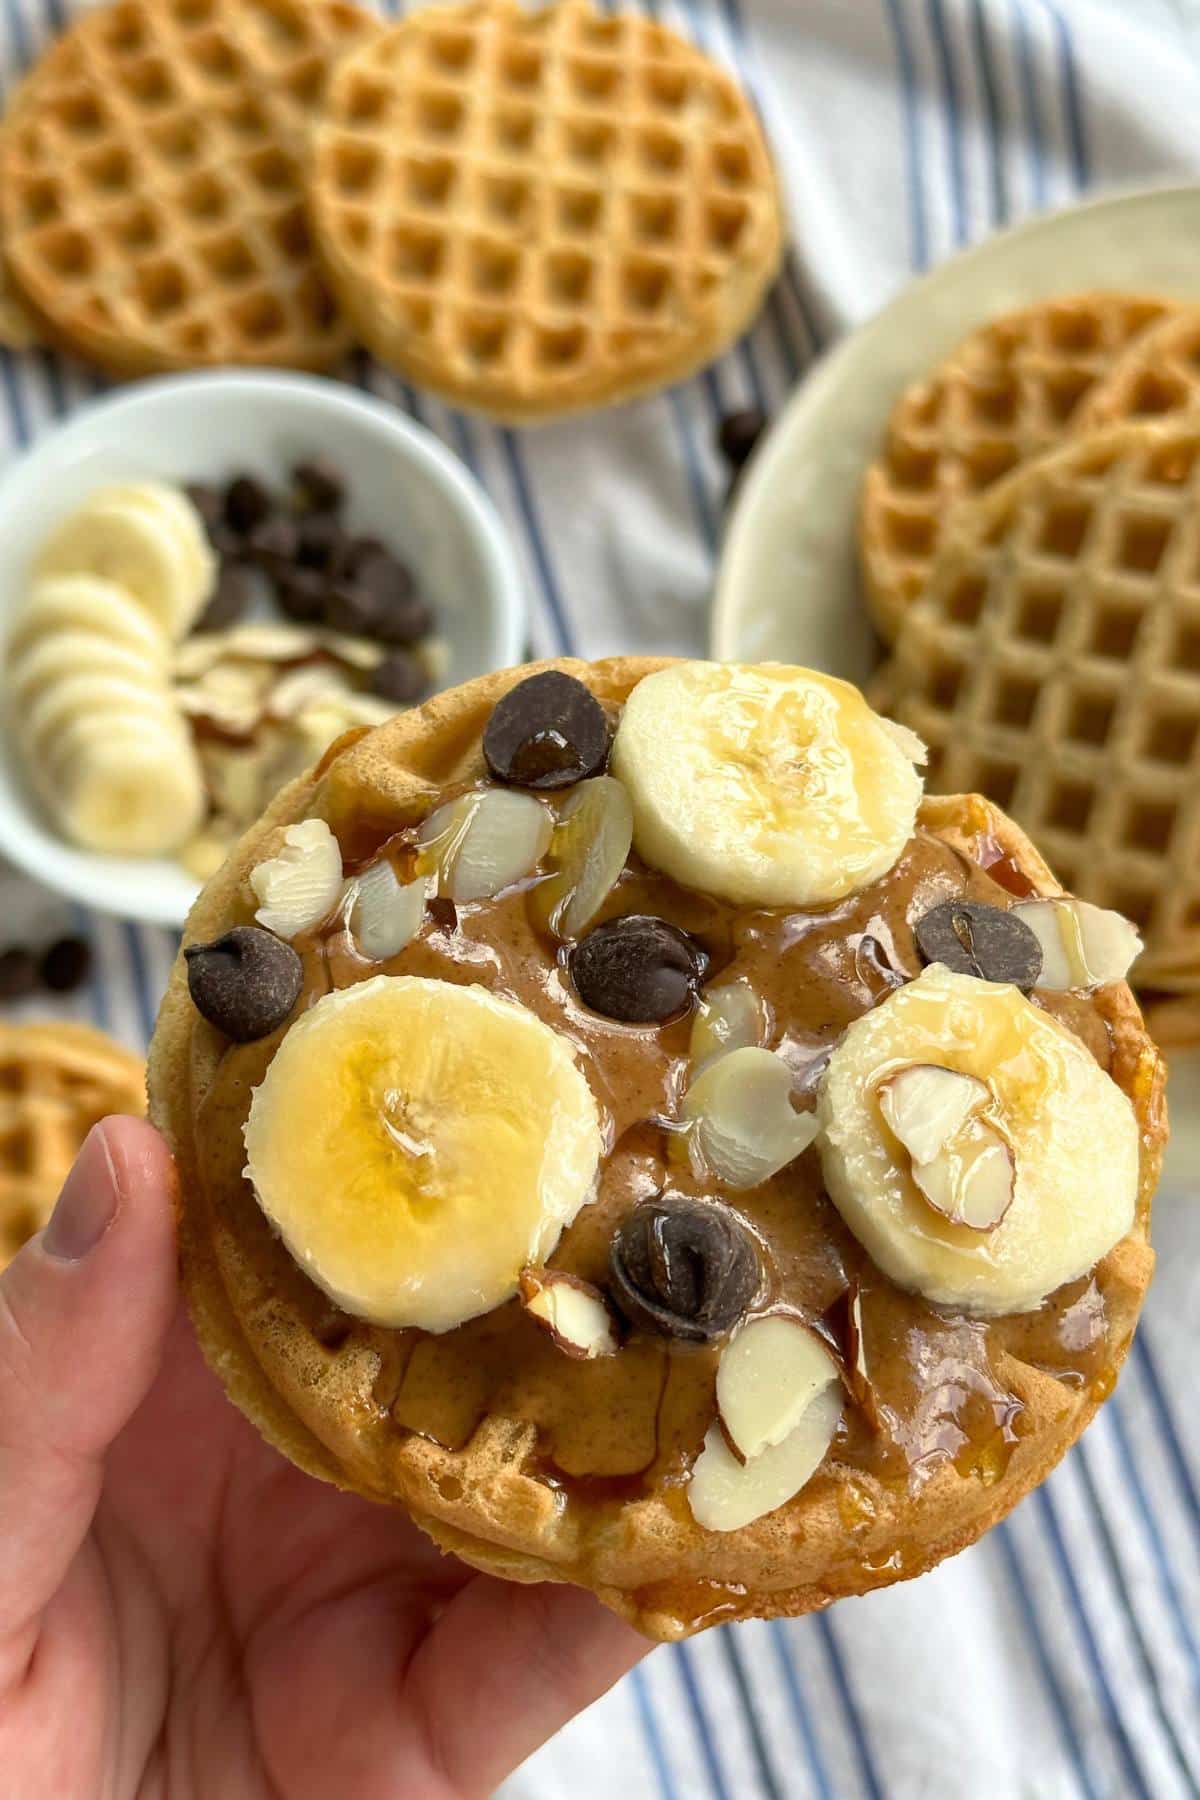 Vegan protein waffle with almond butter, banana slices, chocolate chips, slivered almonds, and maple syrup. background shows more waffles and a bowl with the toppings in it on top of a white and blue striped cloth napkin.